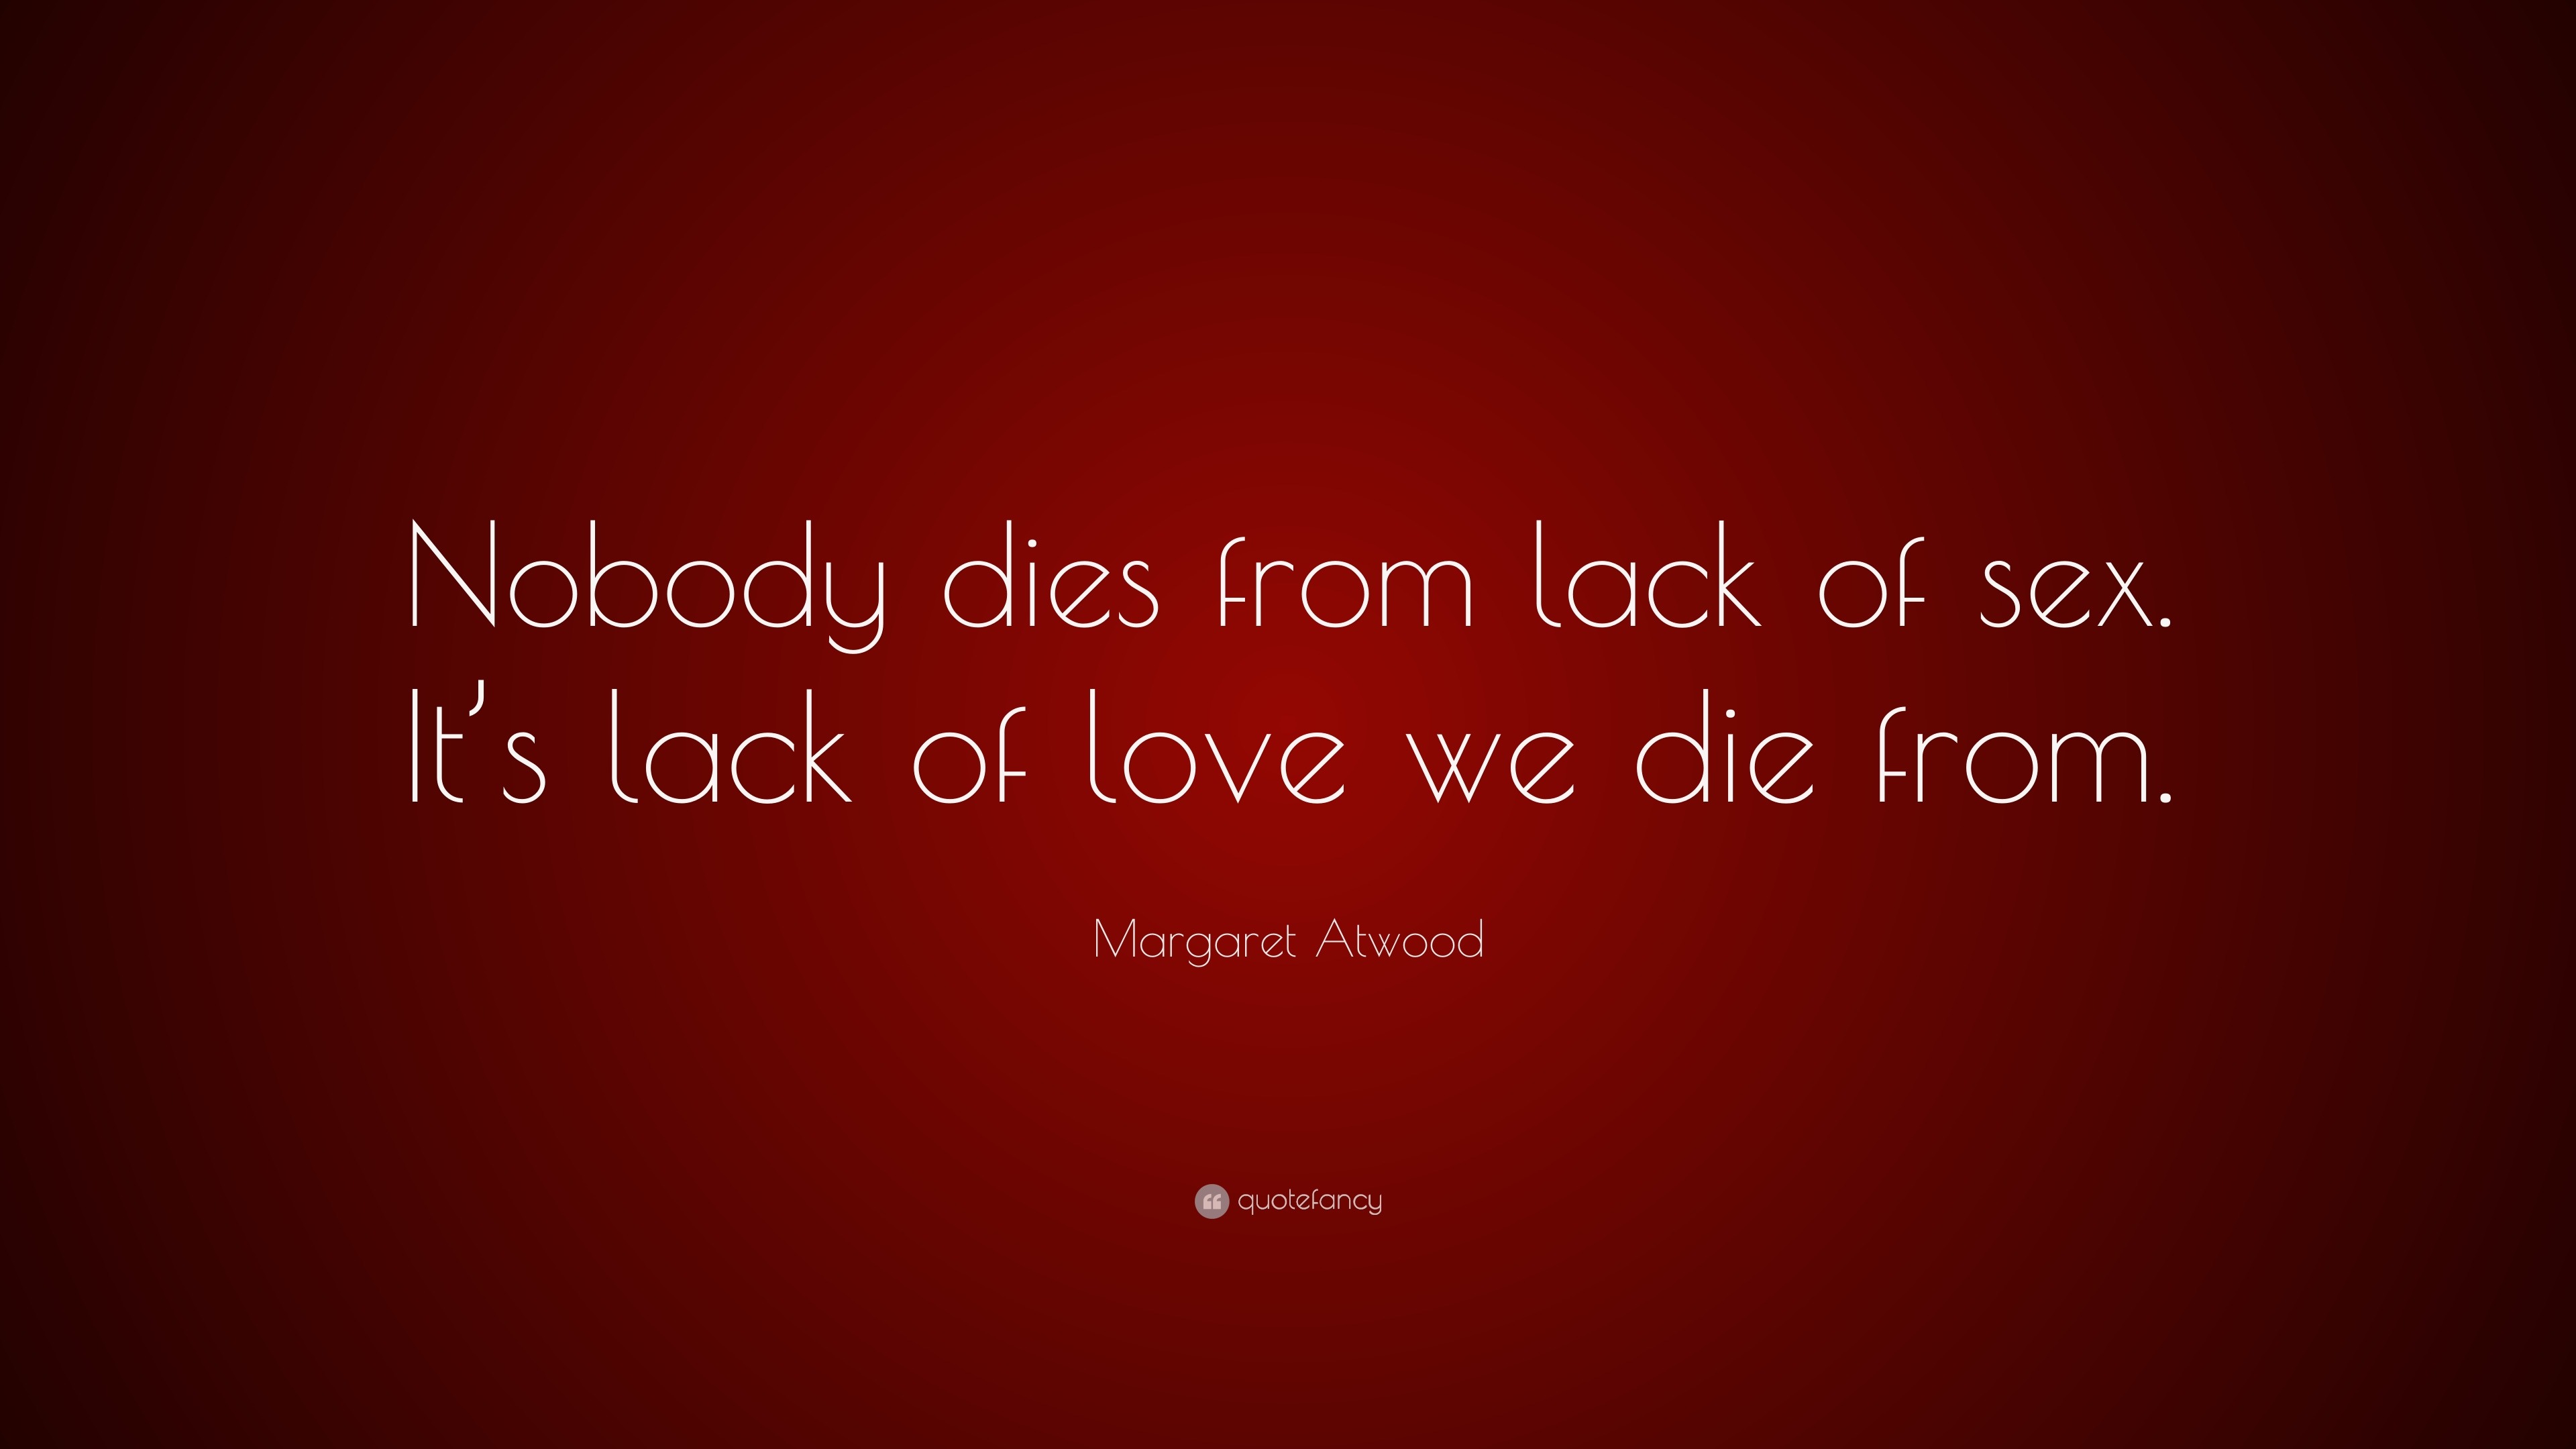 Margaret Atwood Quote “nobody Dies From Lack Of Sex It’s Lack Of Love We Die From ”